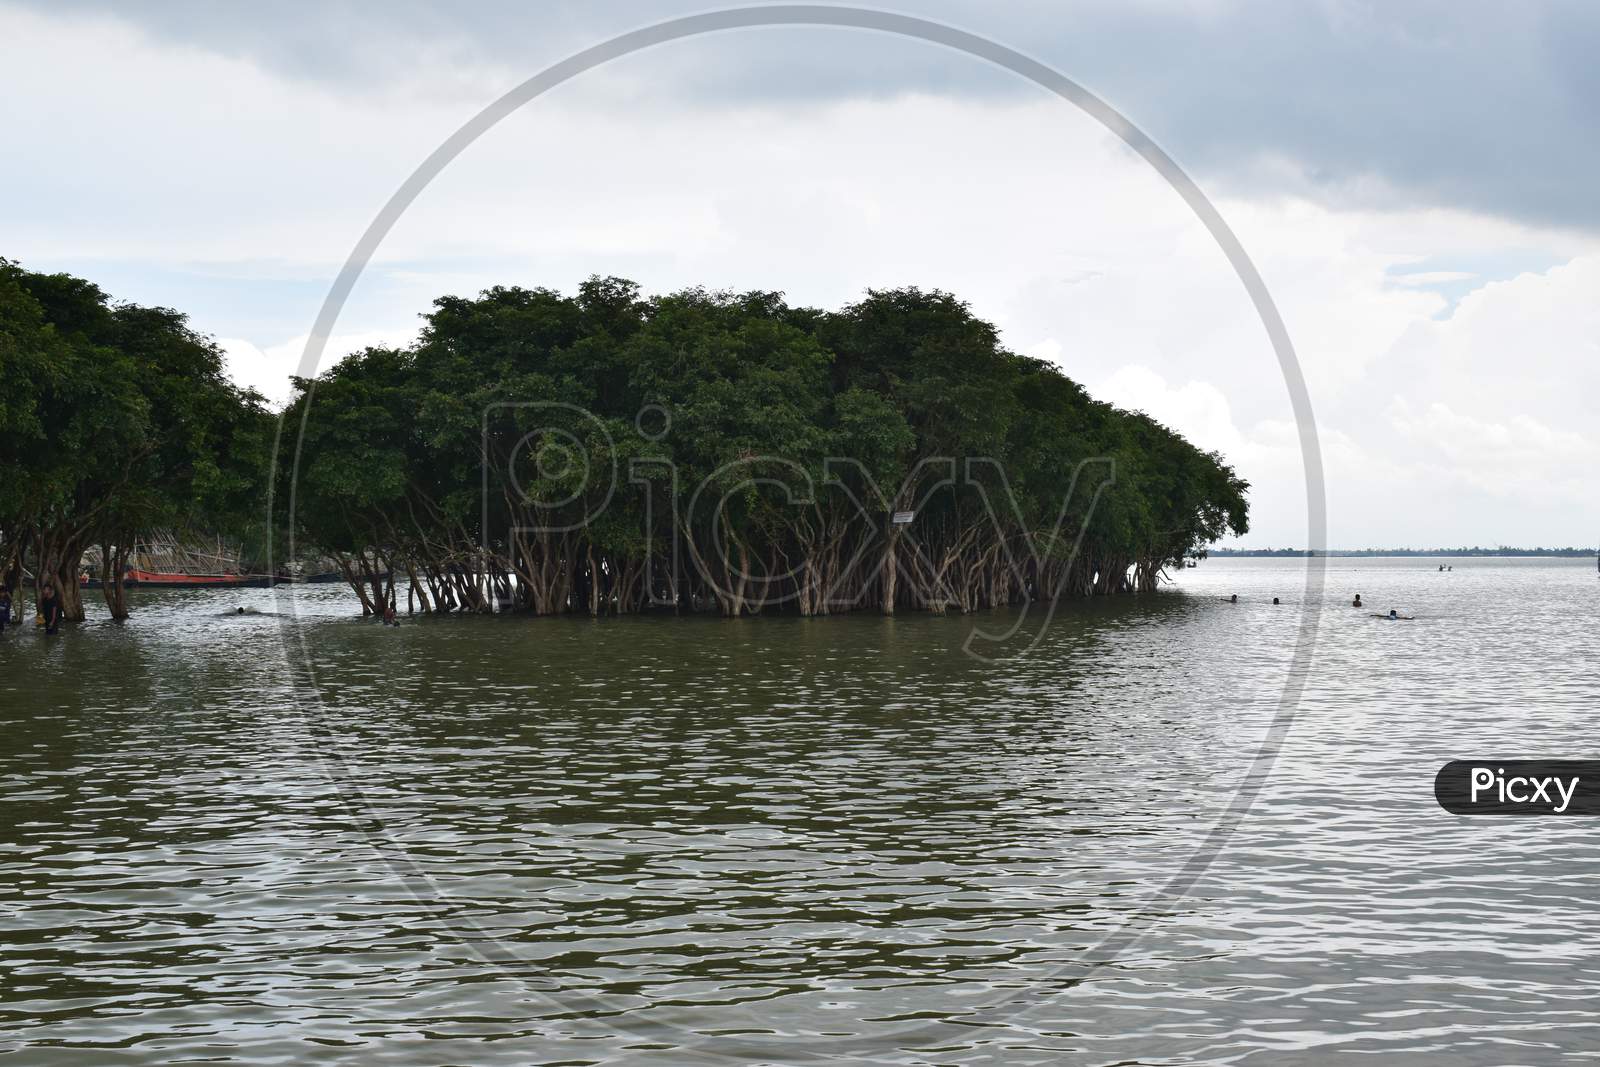 Mangroves On The River Water,Mangrove Trees In Asia